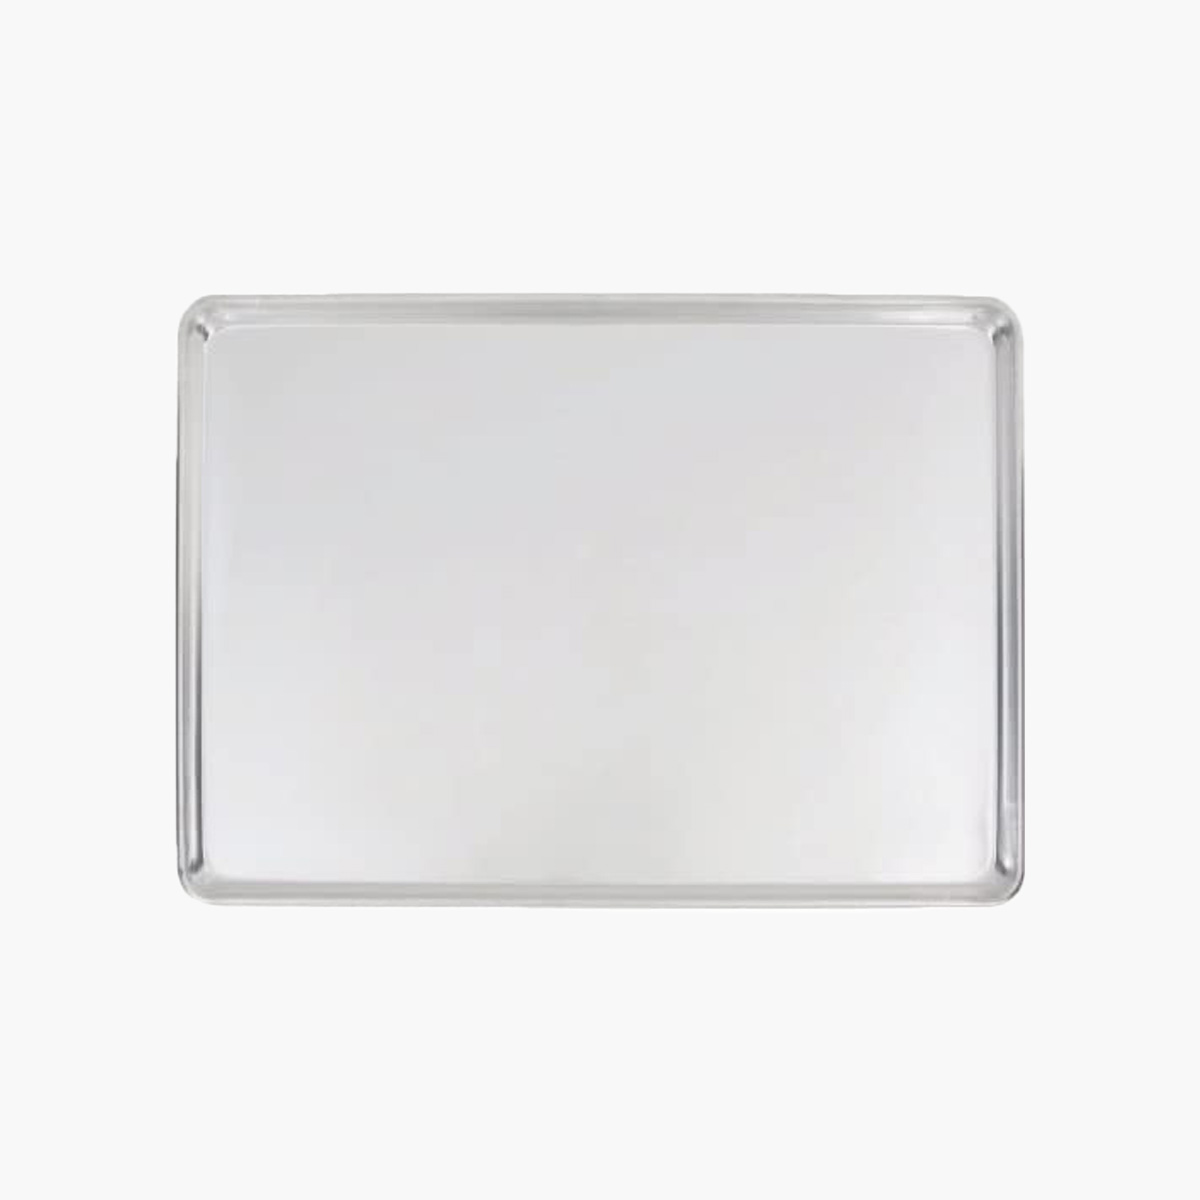 The sheet pan from The French Pantry 3 Piece Baking Gift Set.